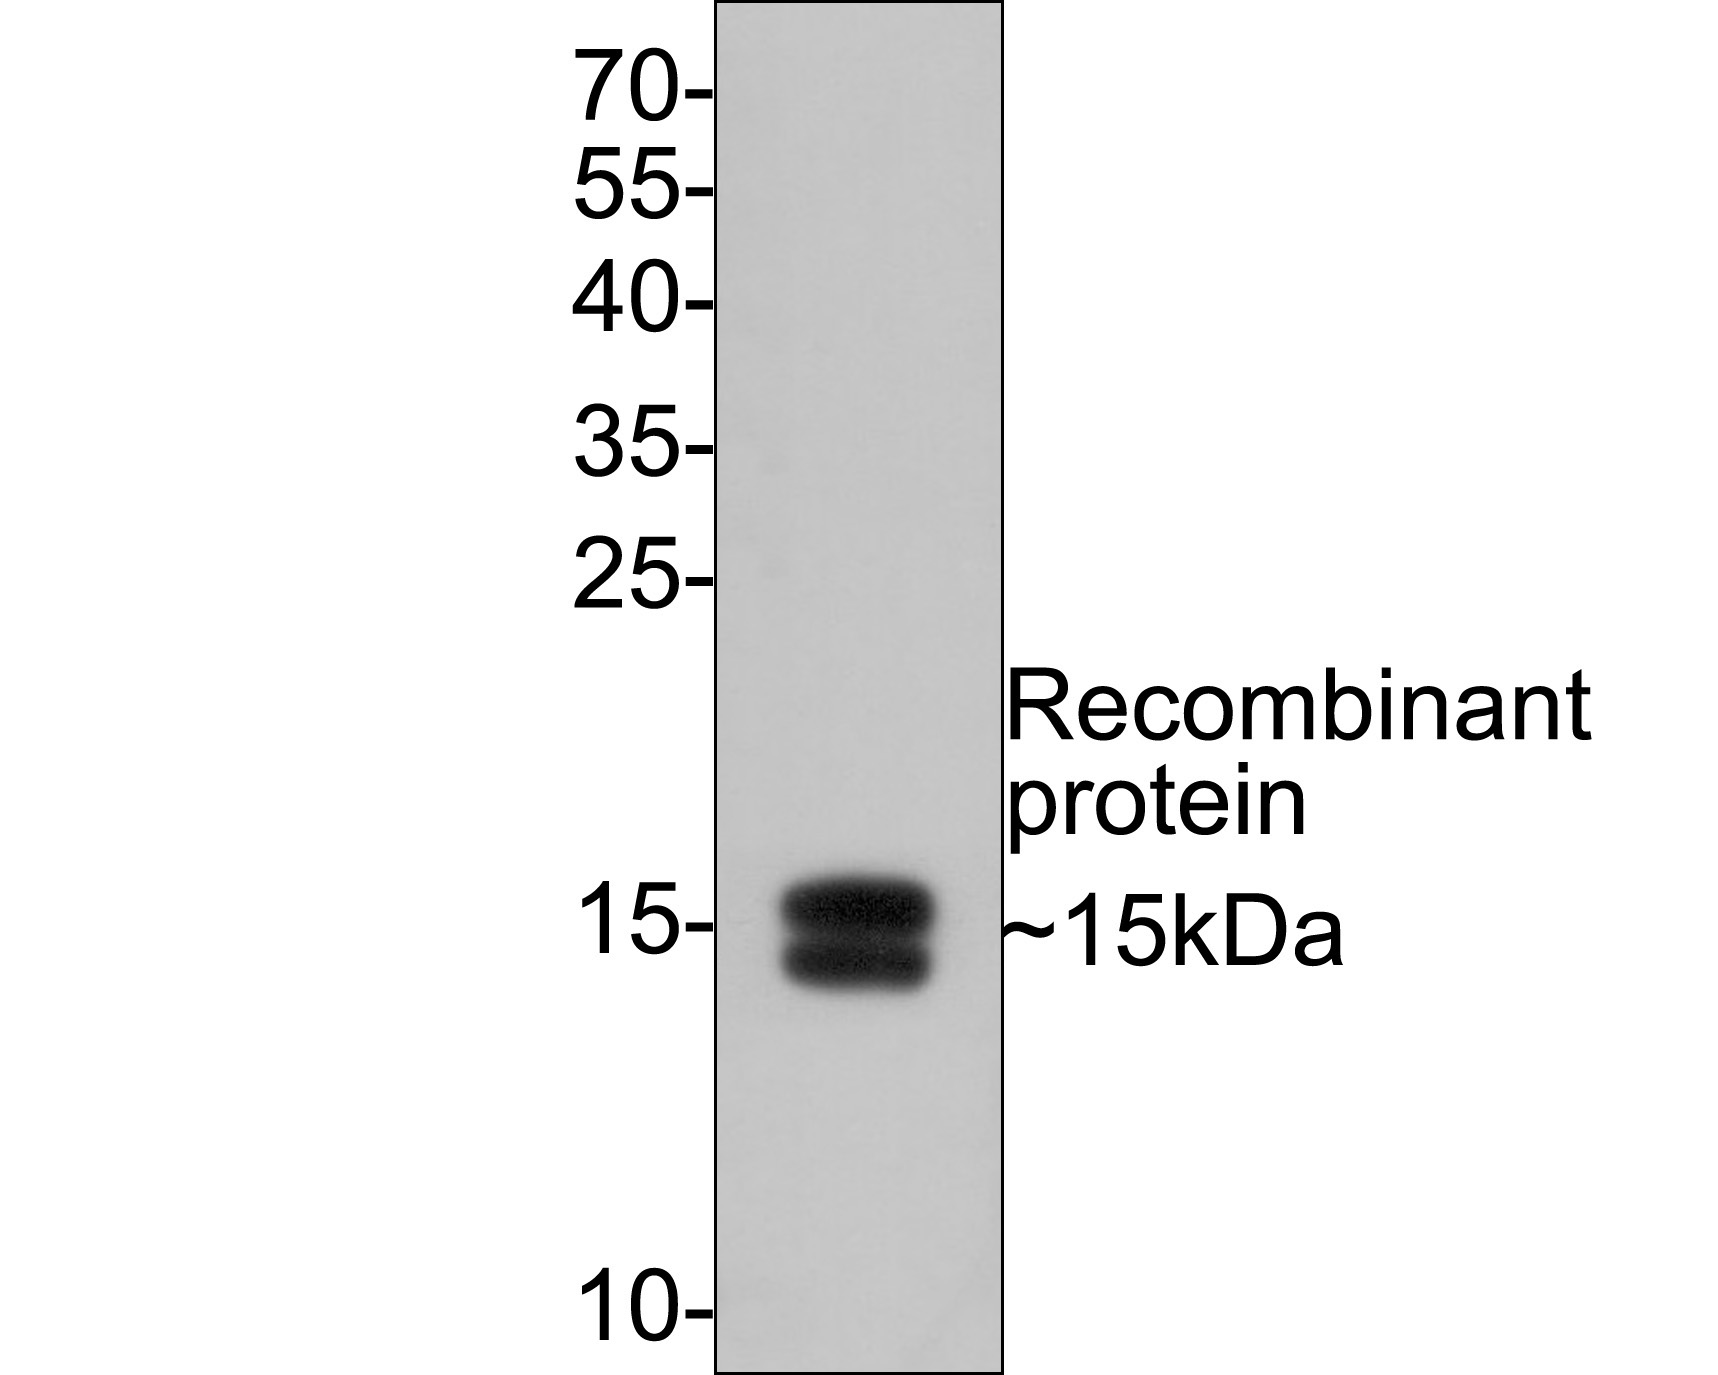 Western blot analysis of IL-2 on IL-2 recombinant protein with Mouse anti-IL-2 antibody (HA601015) at 1/500 dilution.<br />
<br />
Lysates/proteins at 50 ng/Lane.<br />
<br />
Exposure time: 30 seconds;<br />
<br />
15% SDS-PAGE gel.<br />
<br />
Proteins were transferred to a PVDF membrane and blocked with 5% NFDM/TBST for 1 hour at room temperature. The primary antibody (HA601015) at 1/500 dilution was used in 5% NFDM/TBST at room temperature for 2 hours. Goat Anti-Mouse IgG - HRP Secondary Antibody (HA1006) at 1:100,000 dilution was used for 1 hour at room temperature.